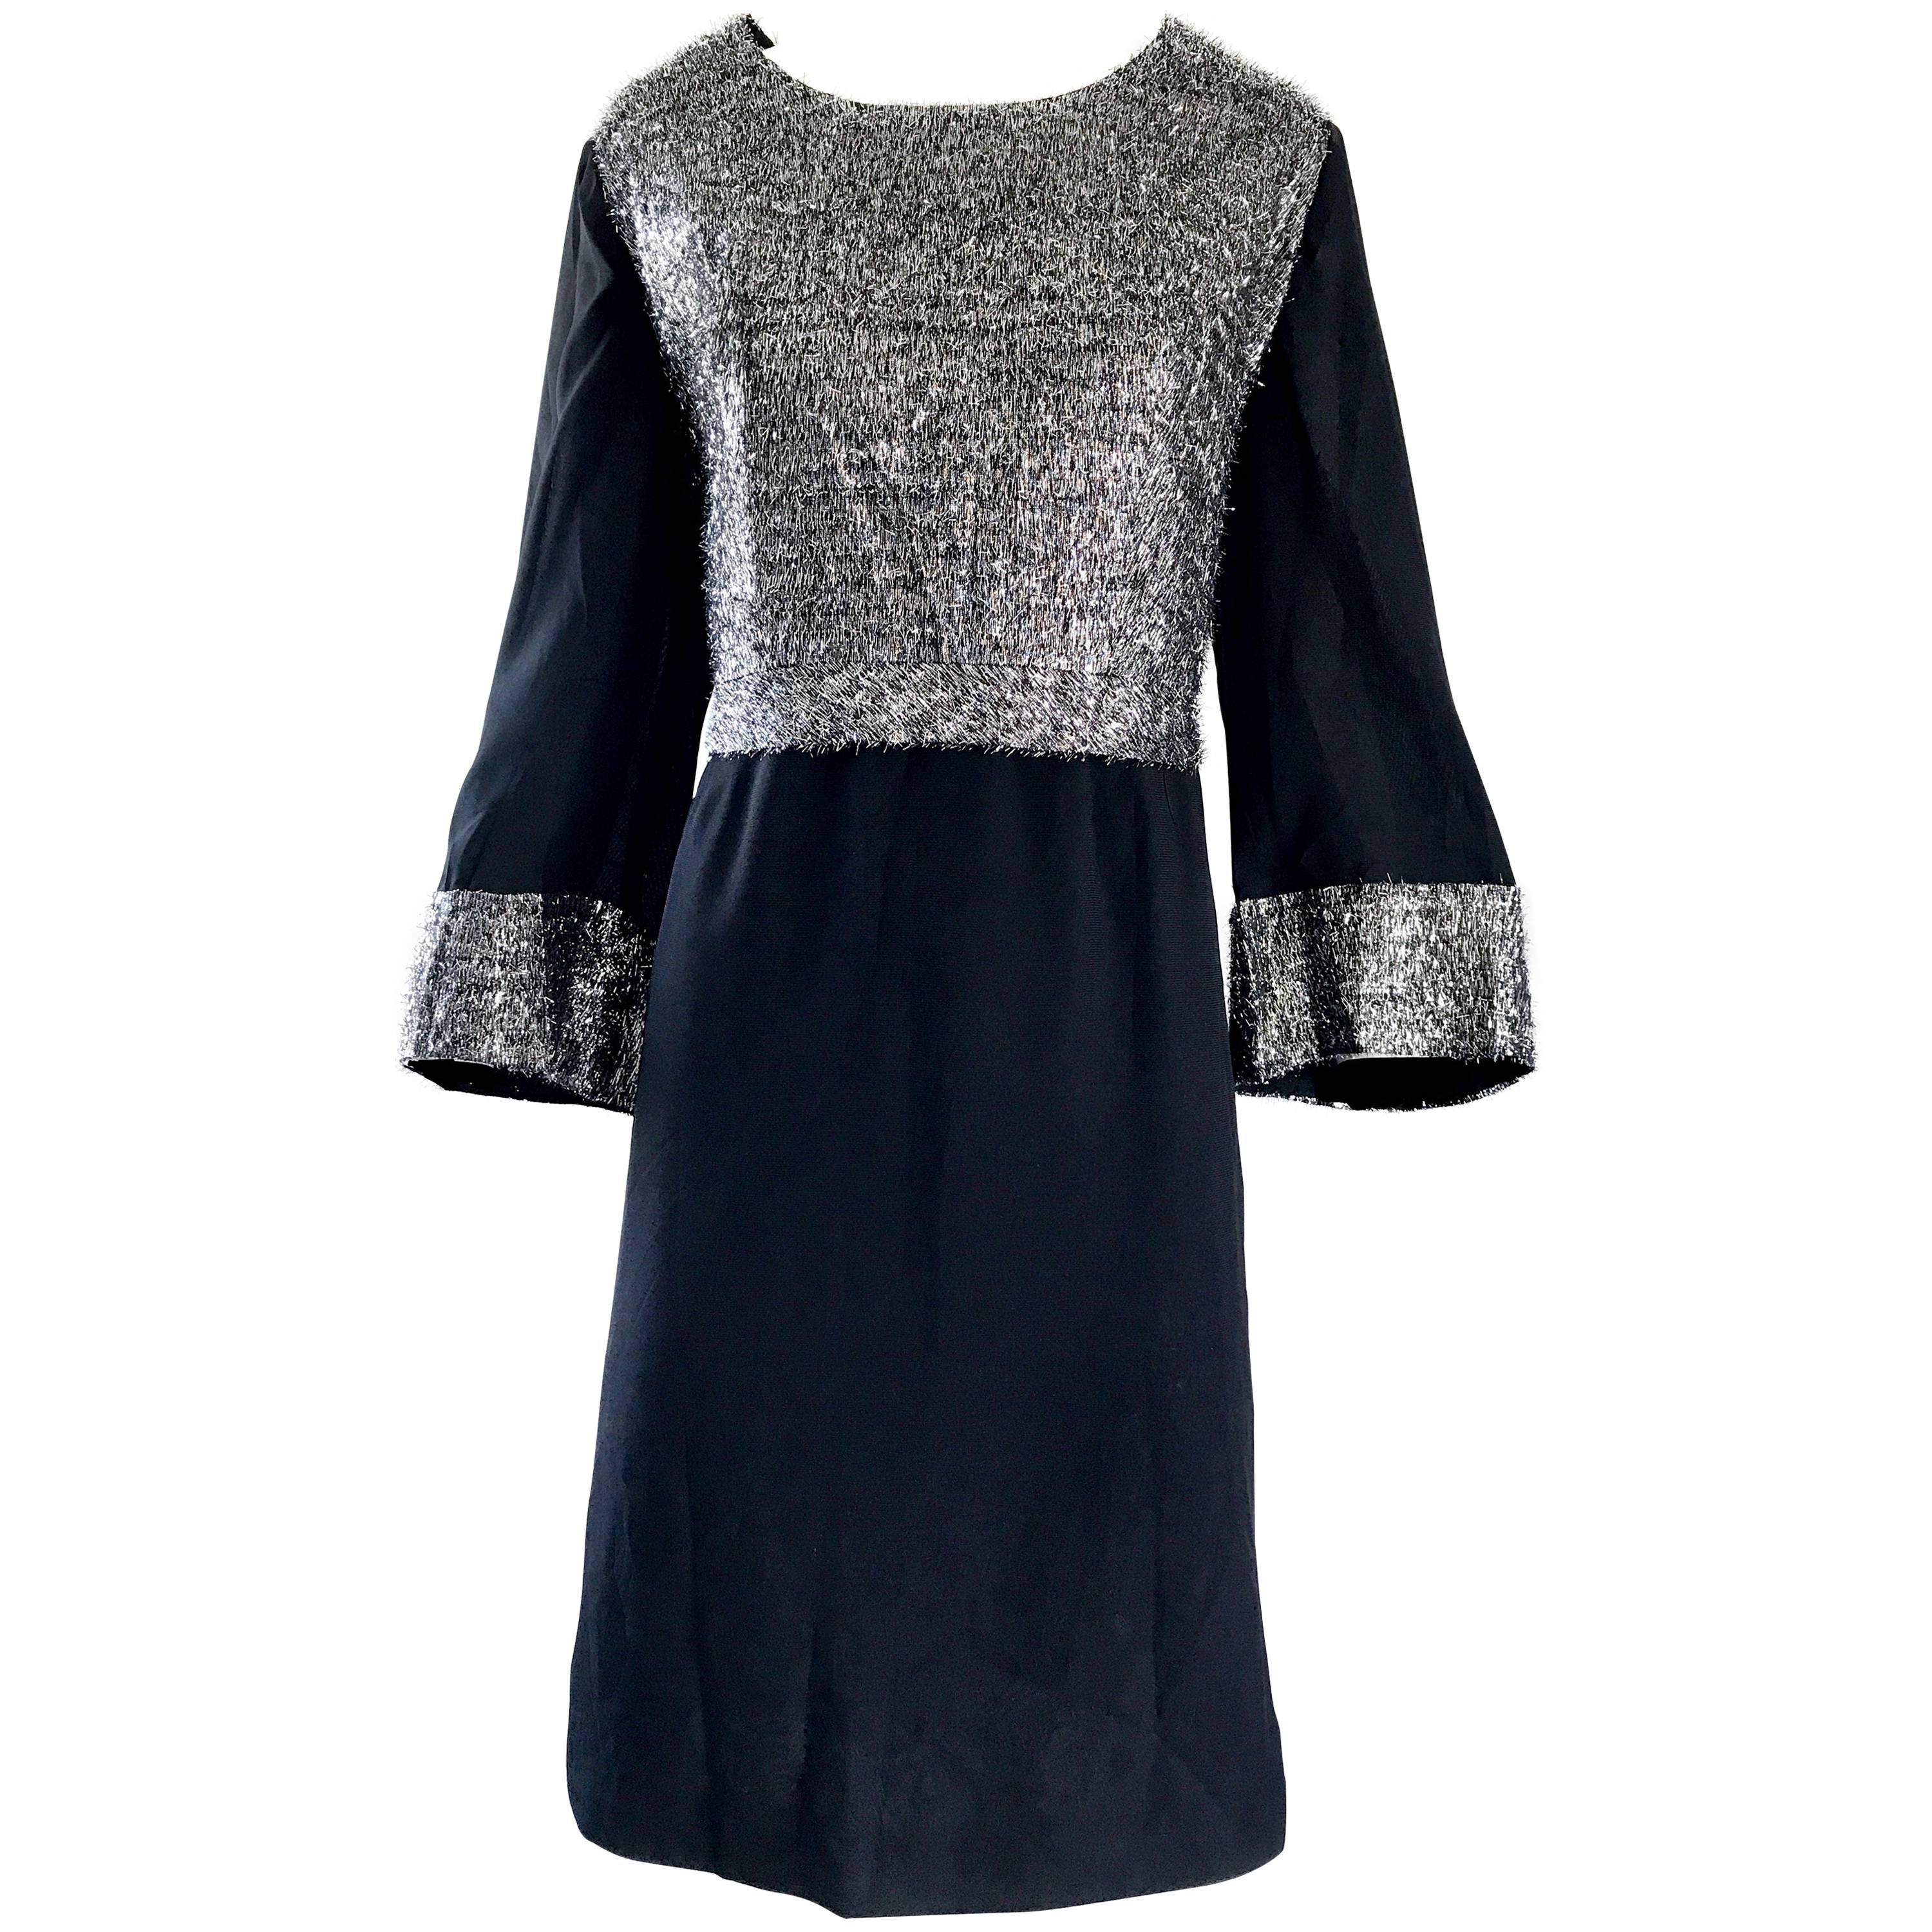 Chic 1960s Plus Size 16 / 18 Silver + Black 60s Vintage Bell Sleeve Shift Dress For Sale